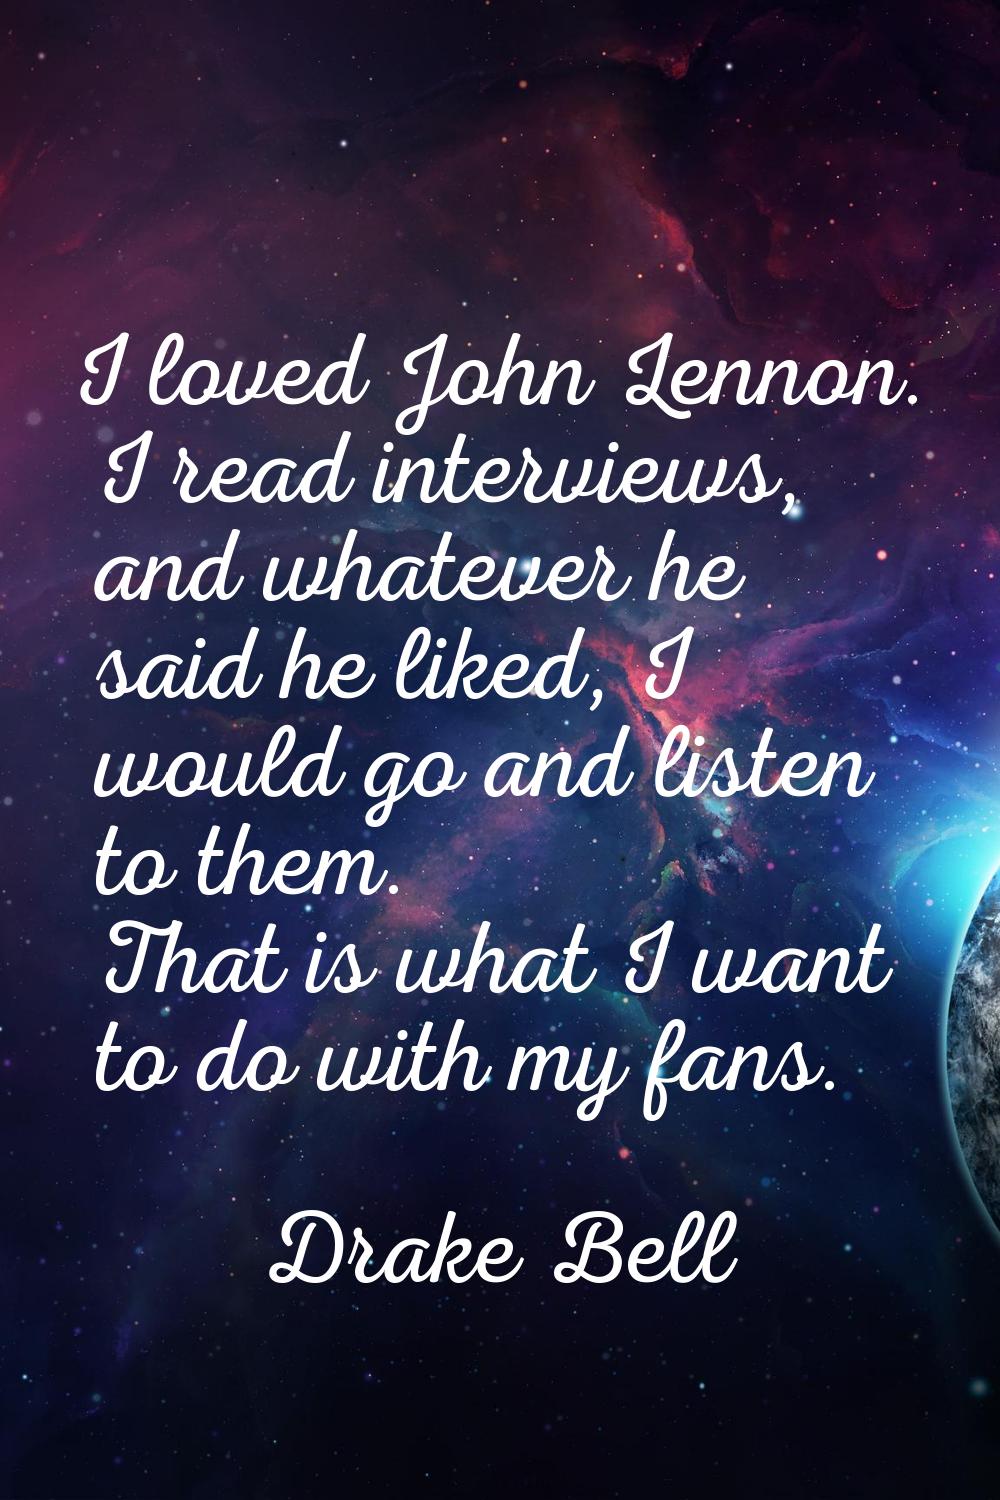 I loved John Lennon. I read interviews, and whatever he said he liked, I would go and listen to the